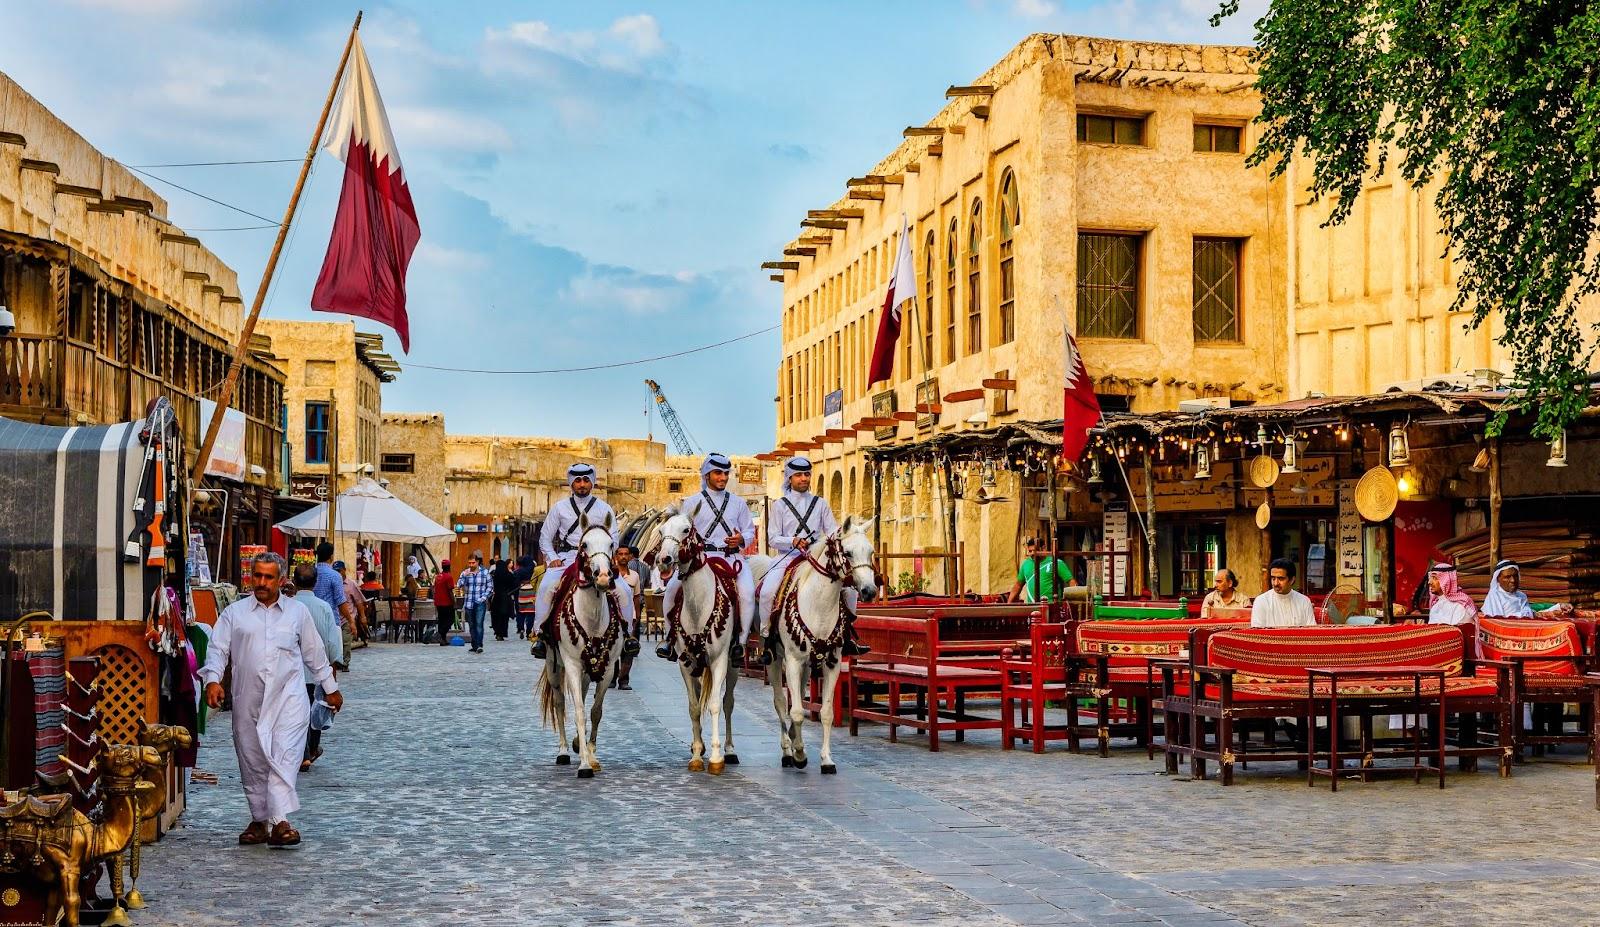 Souq Waqif is a souq in Doha, in the state of Qatar. The souq is noted for selling traditional garments, spices, handicrafts, and souvenirs